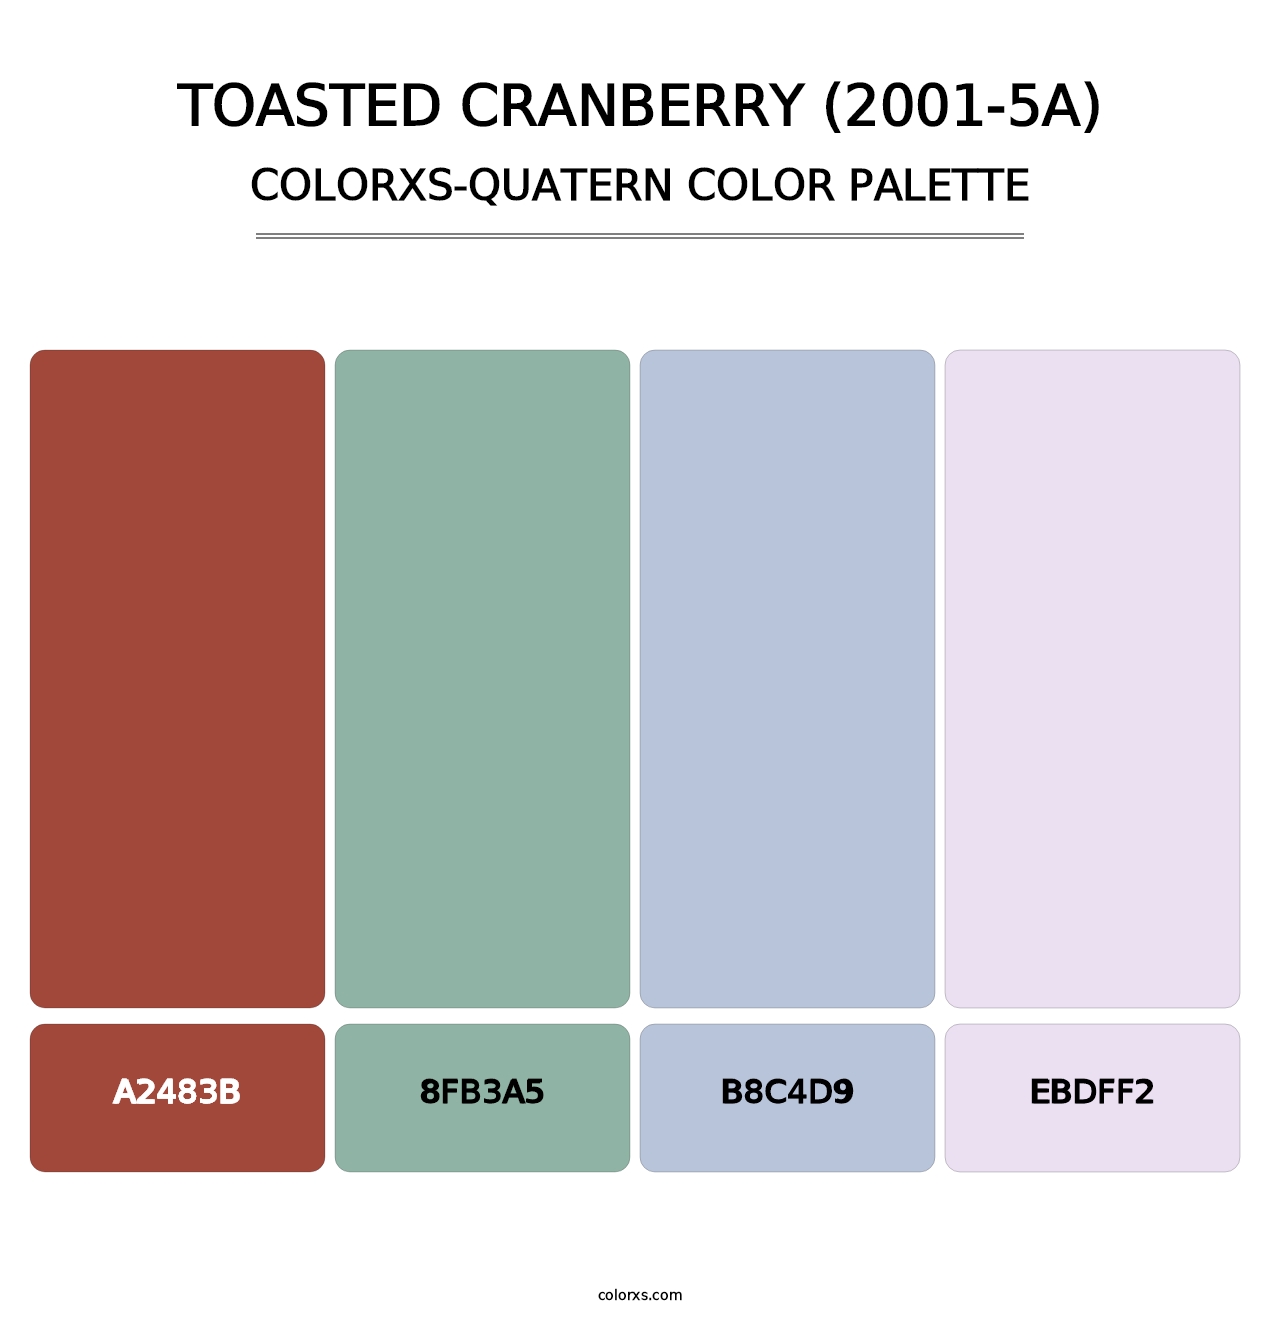 Toasted Cranberry (2001-5A) - Colorxs Quatern Palette